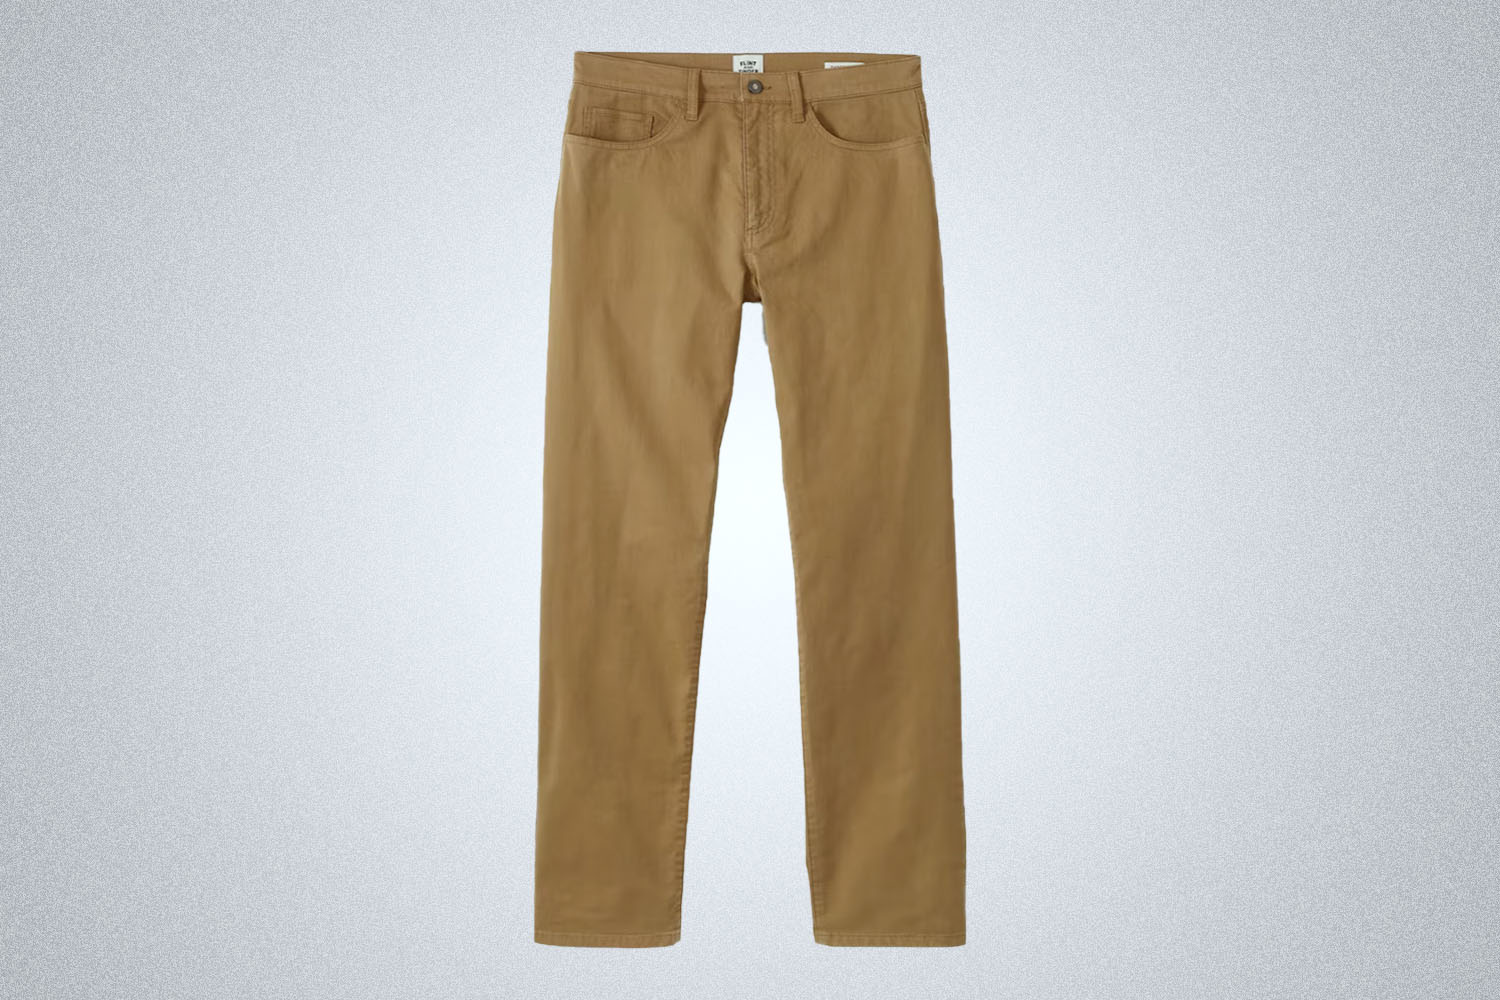 a pair of brown Flint and Tinder 365 chinos on a grey background